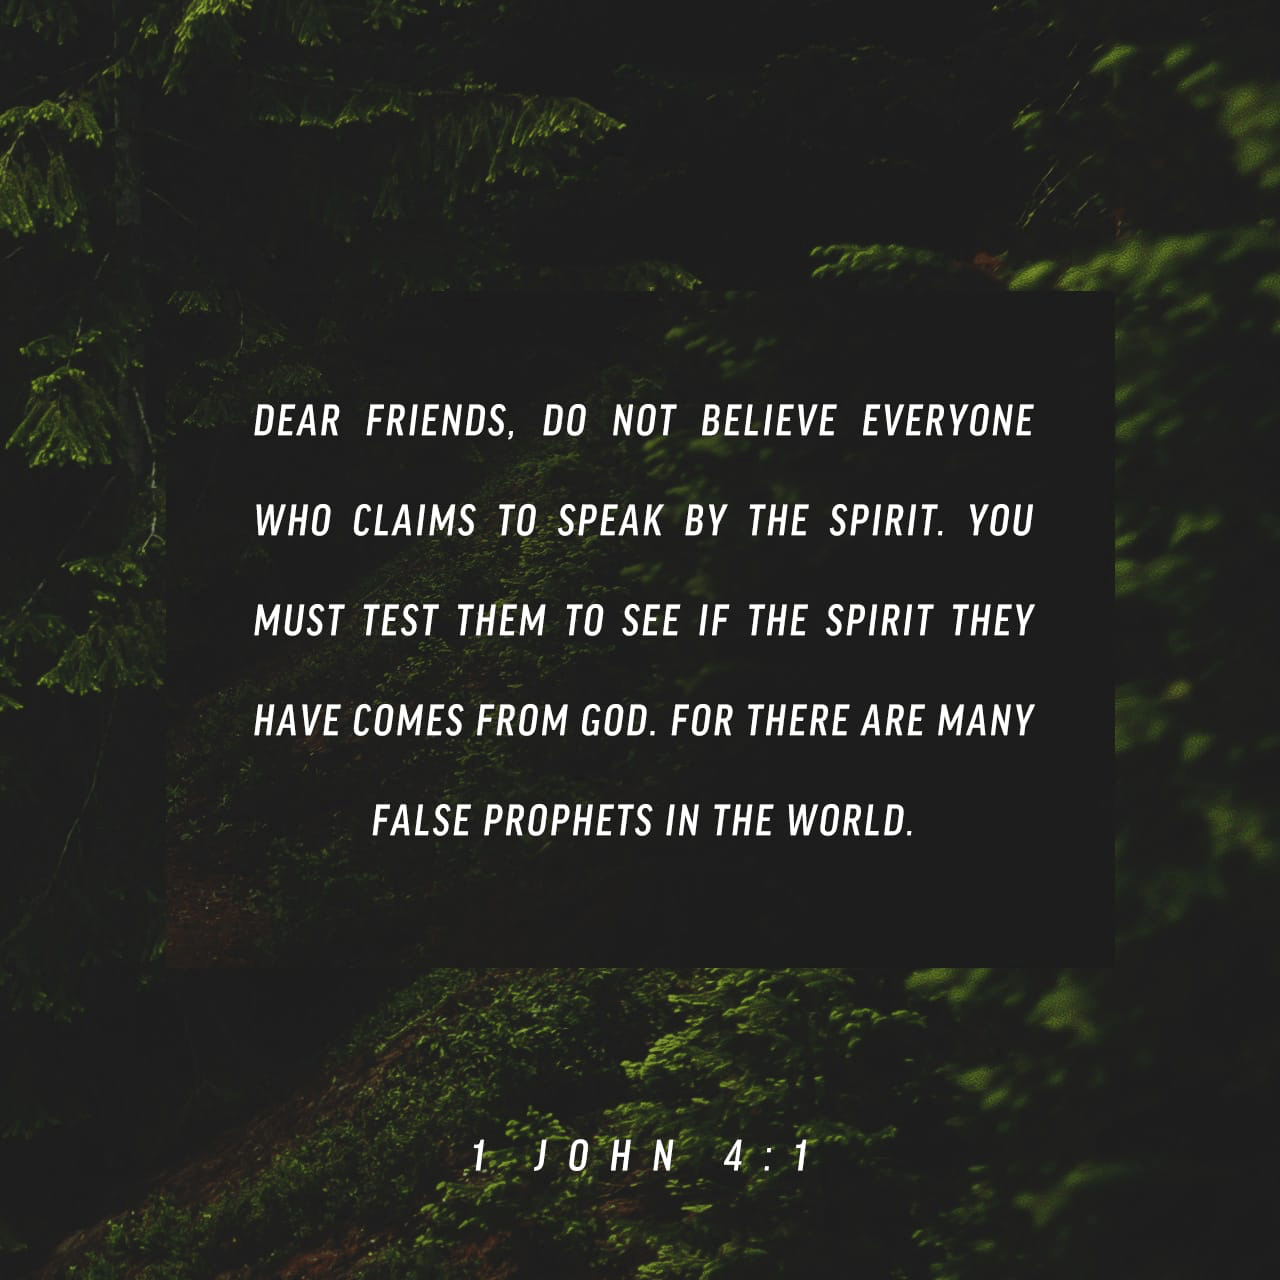 VOTD February 24 - “Beloved, do not believe every spirit, but test the spirits to see whether they are from God, because many false prophets have gone out into the world.” ‭‭1 John‬ ‭4:1‬ ‭NASB‬‬